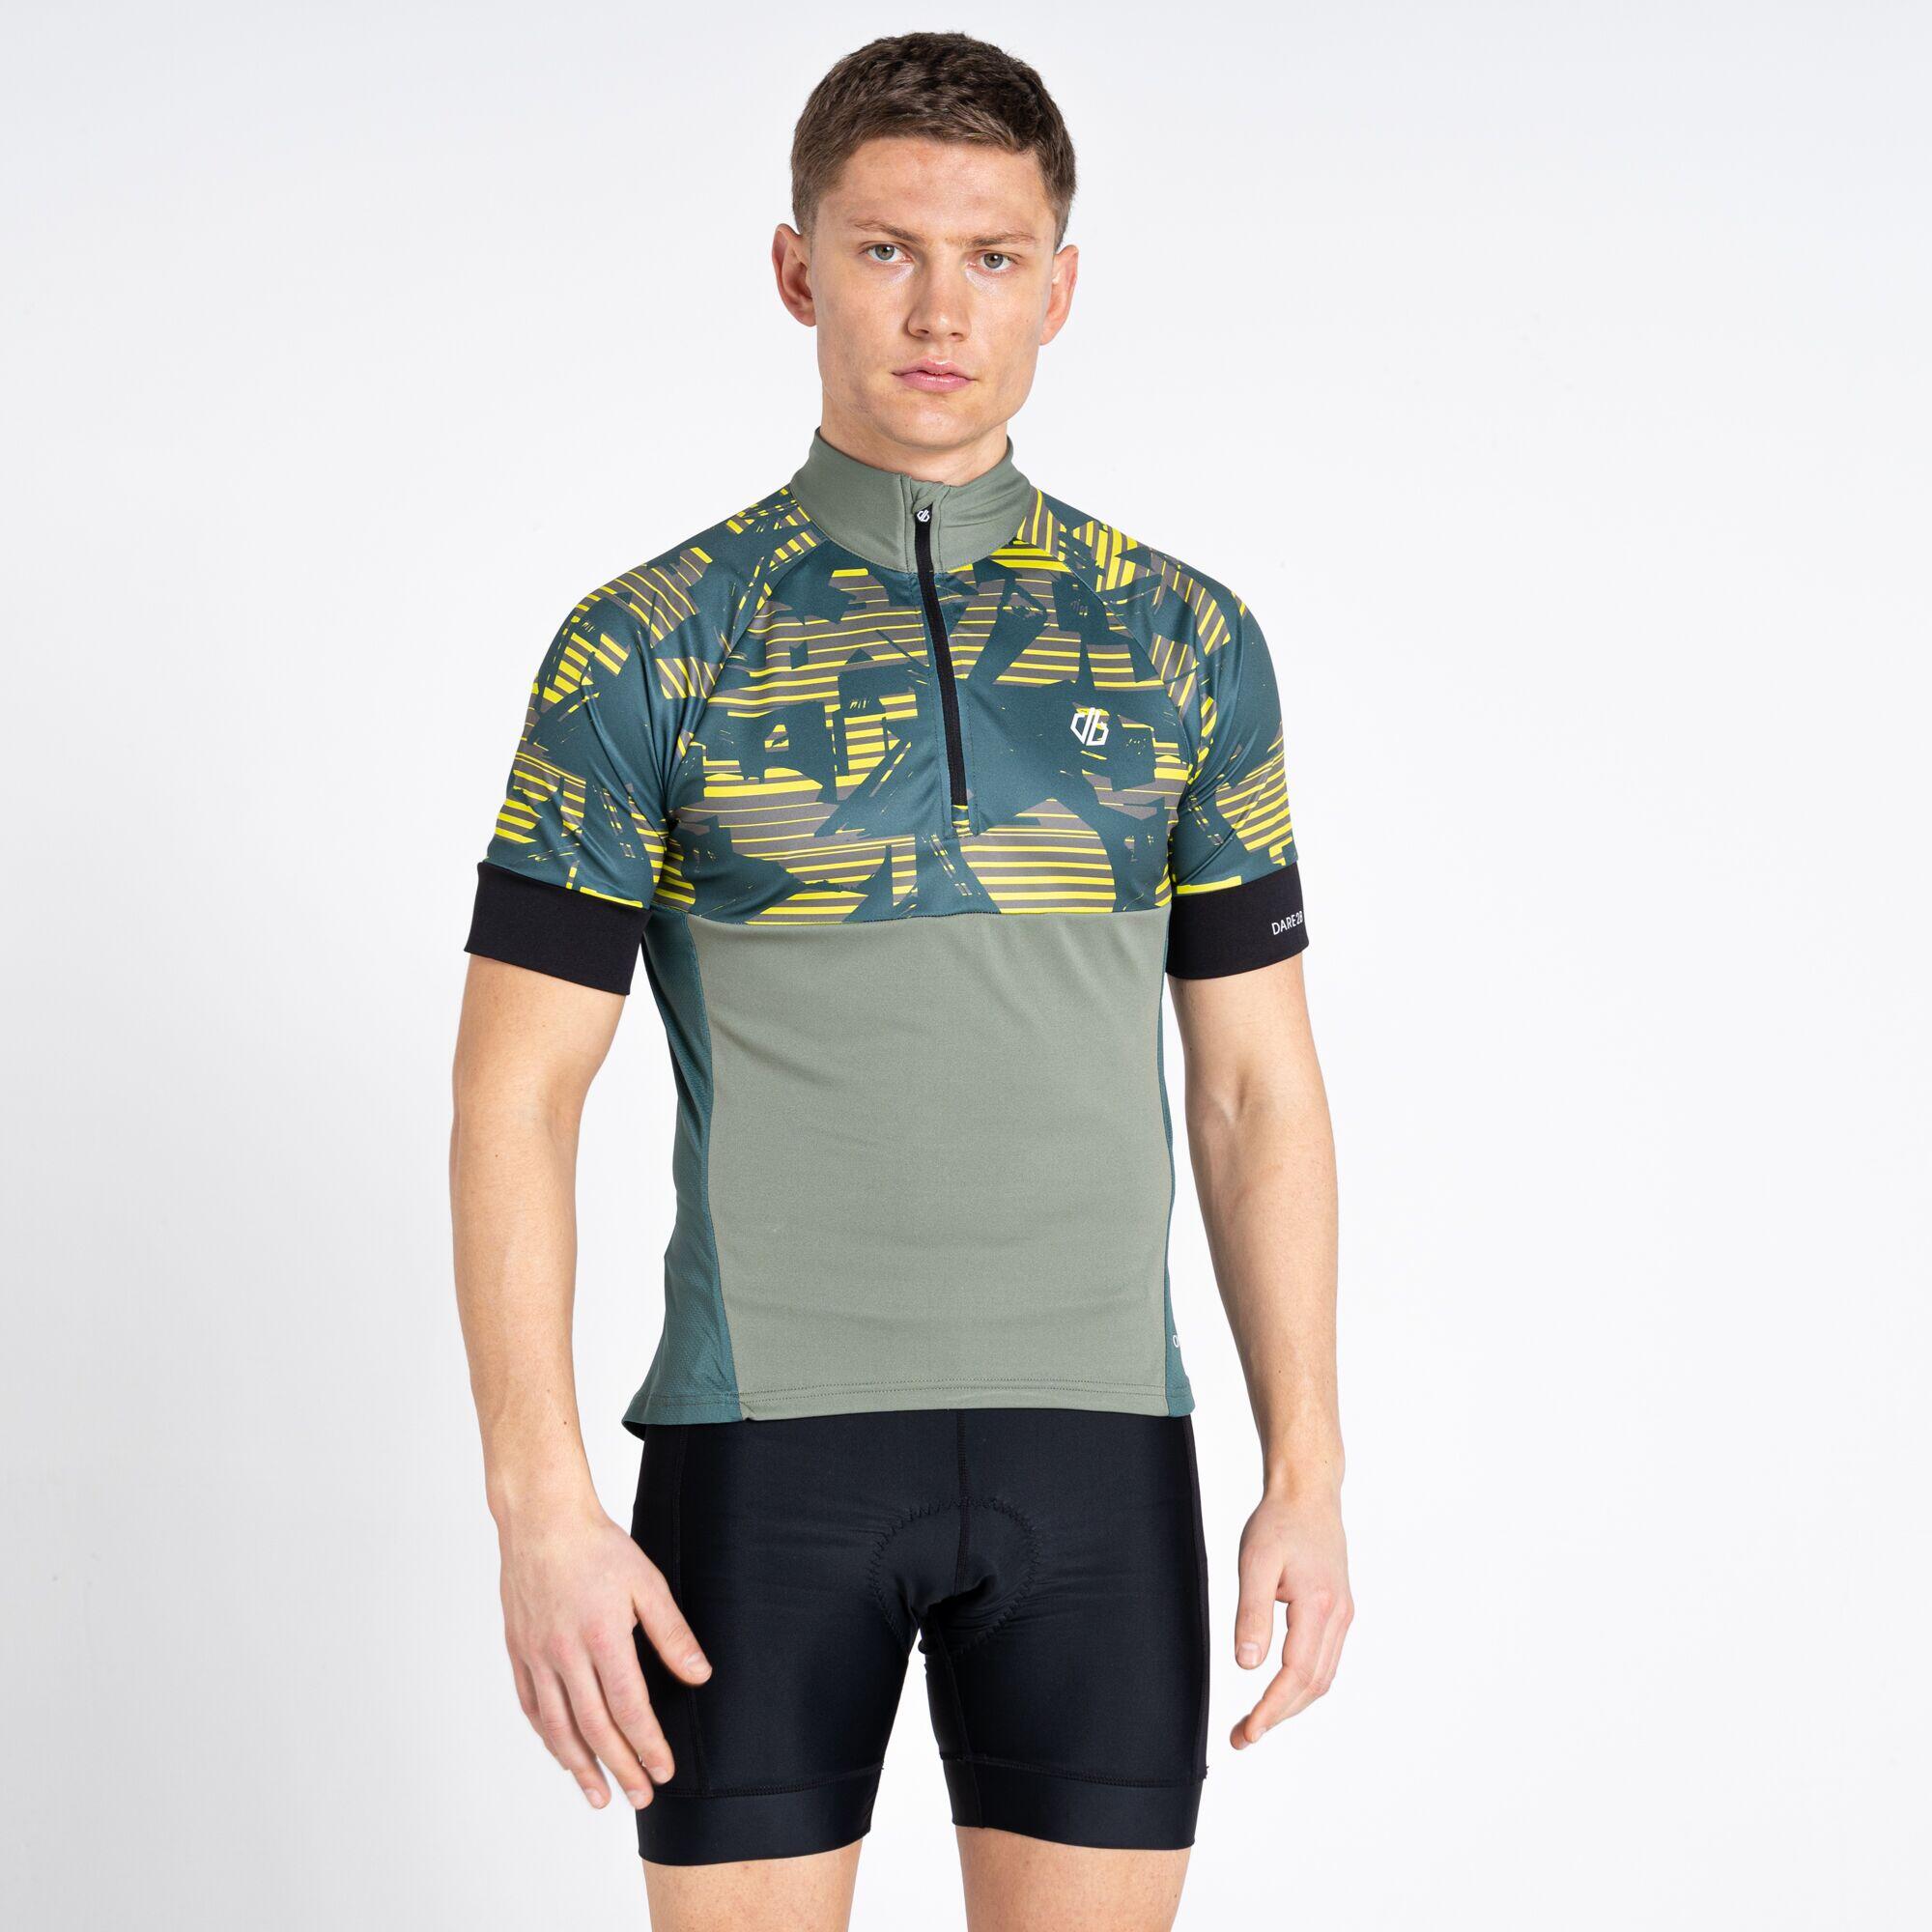 Stay The CourseII Men's Cycling 1/2 Zip Short Sleeve T-Shirt - Agave Green 2/7